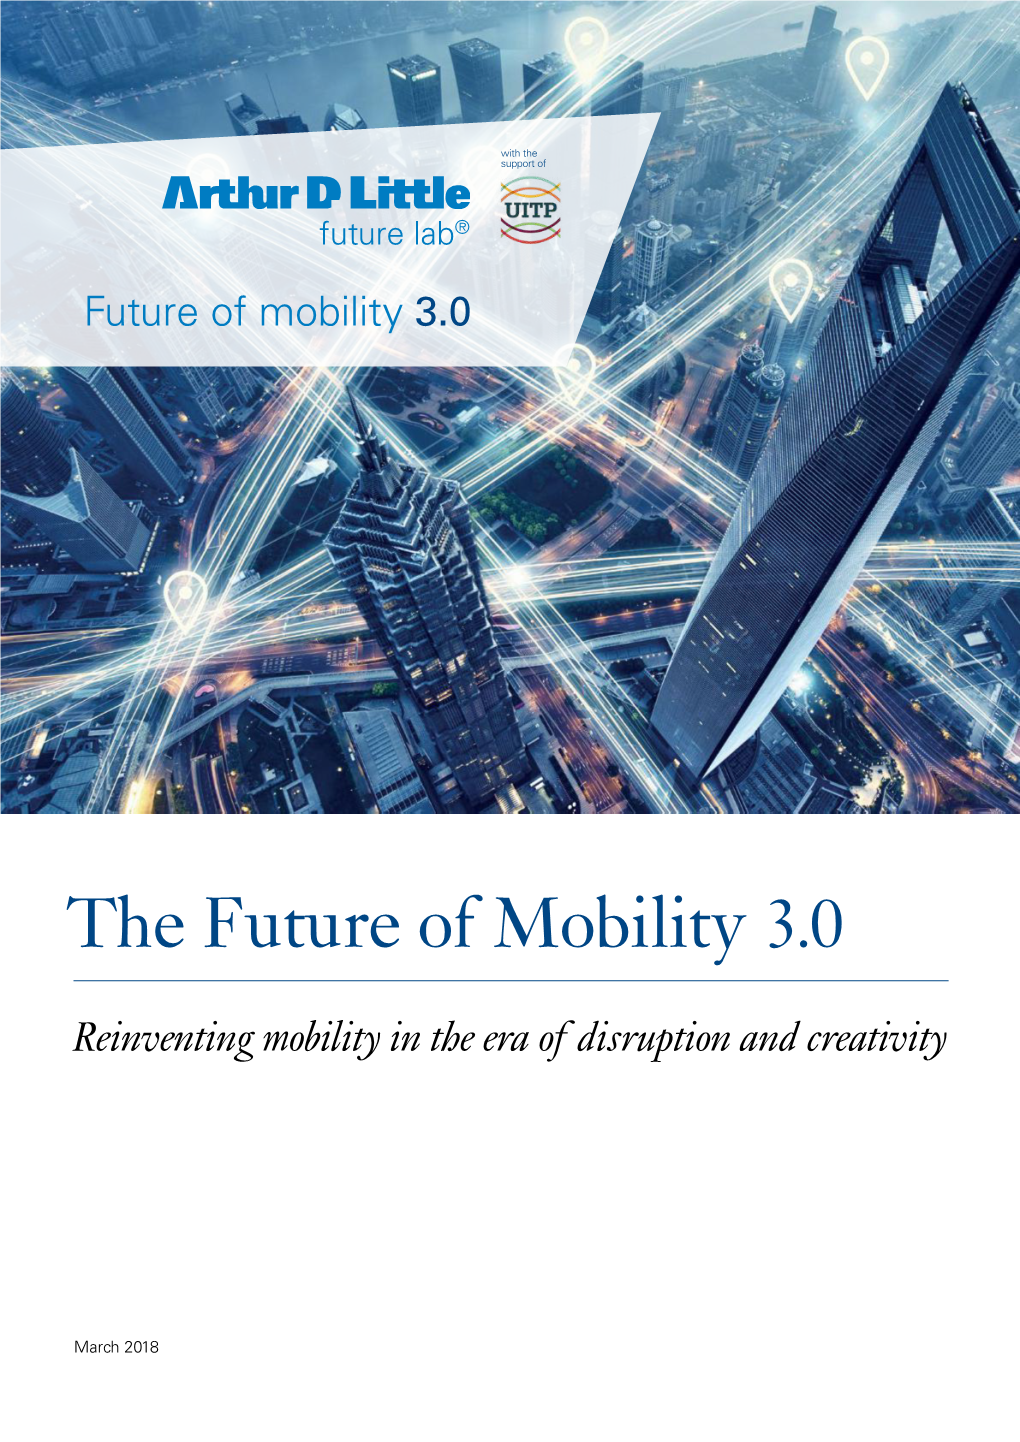 The Future of Mobility 3.0